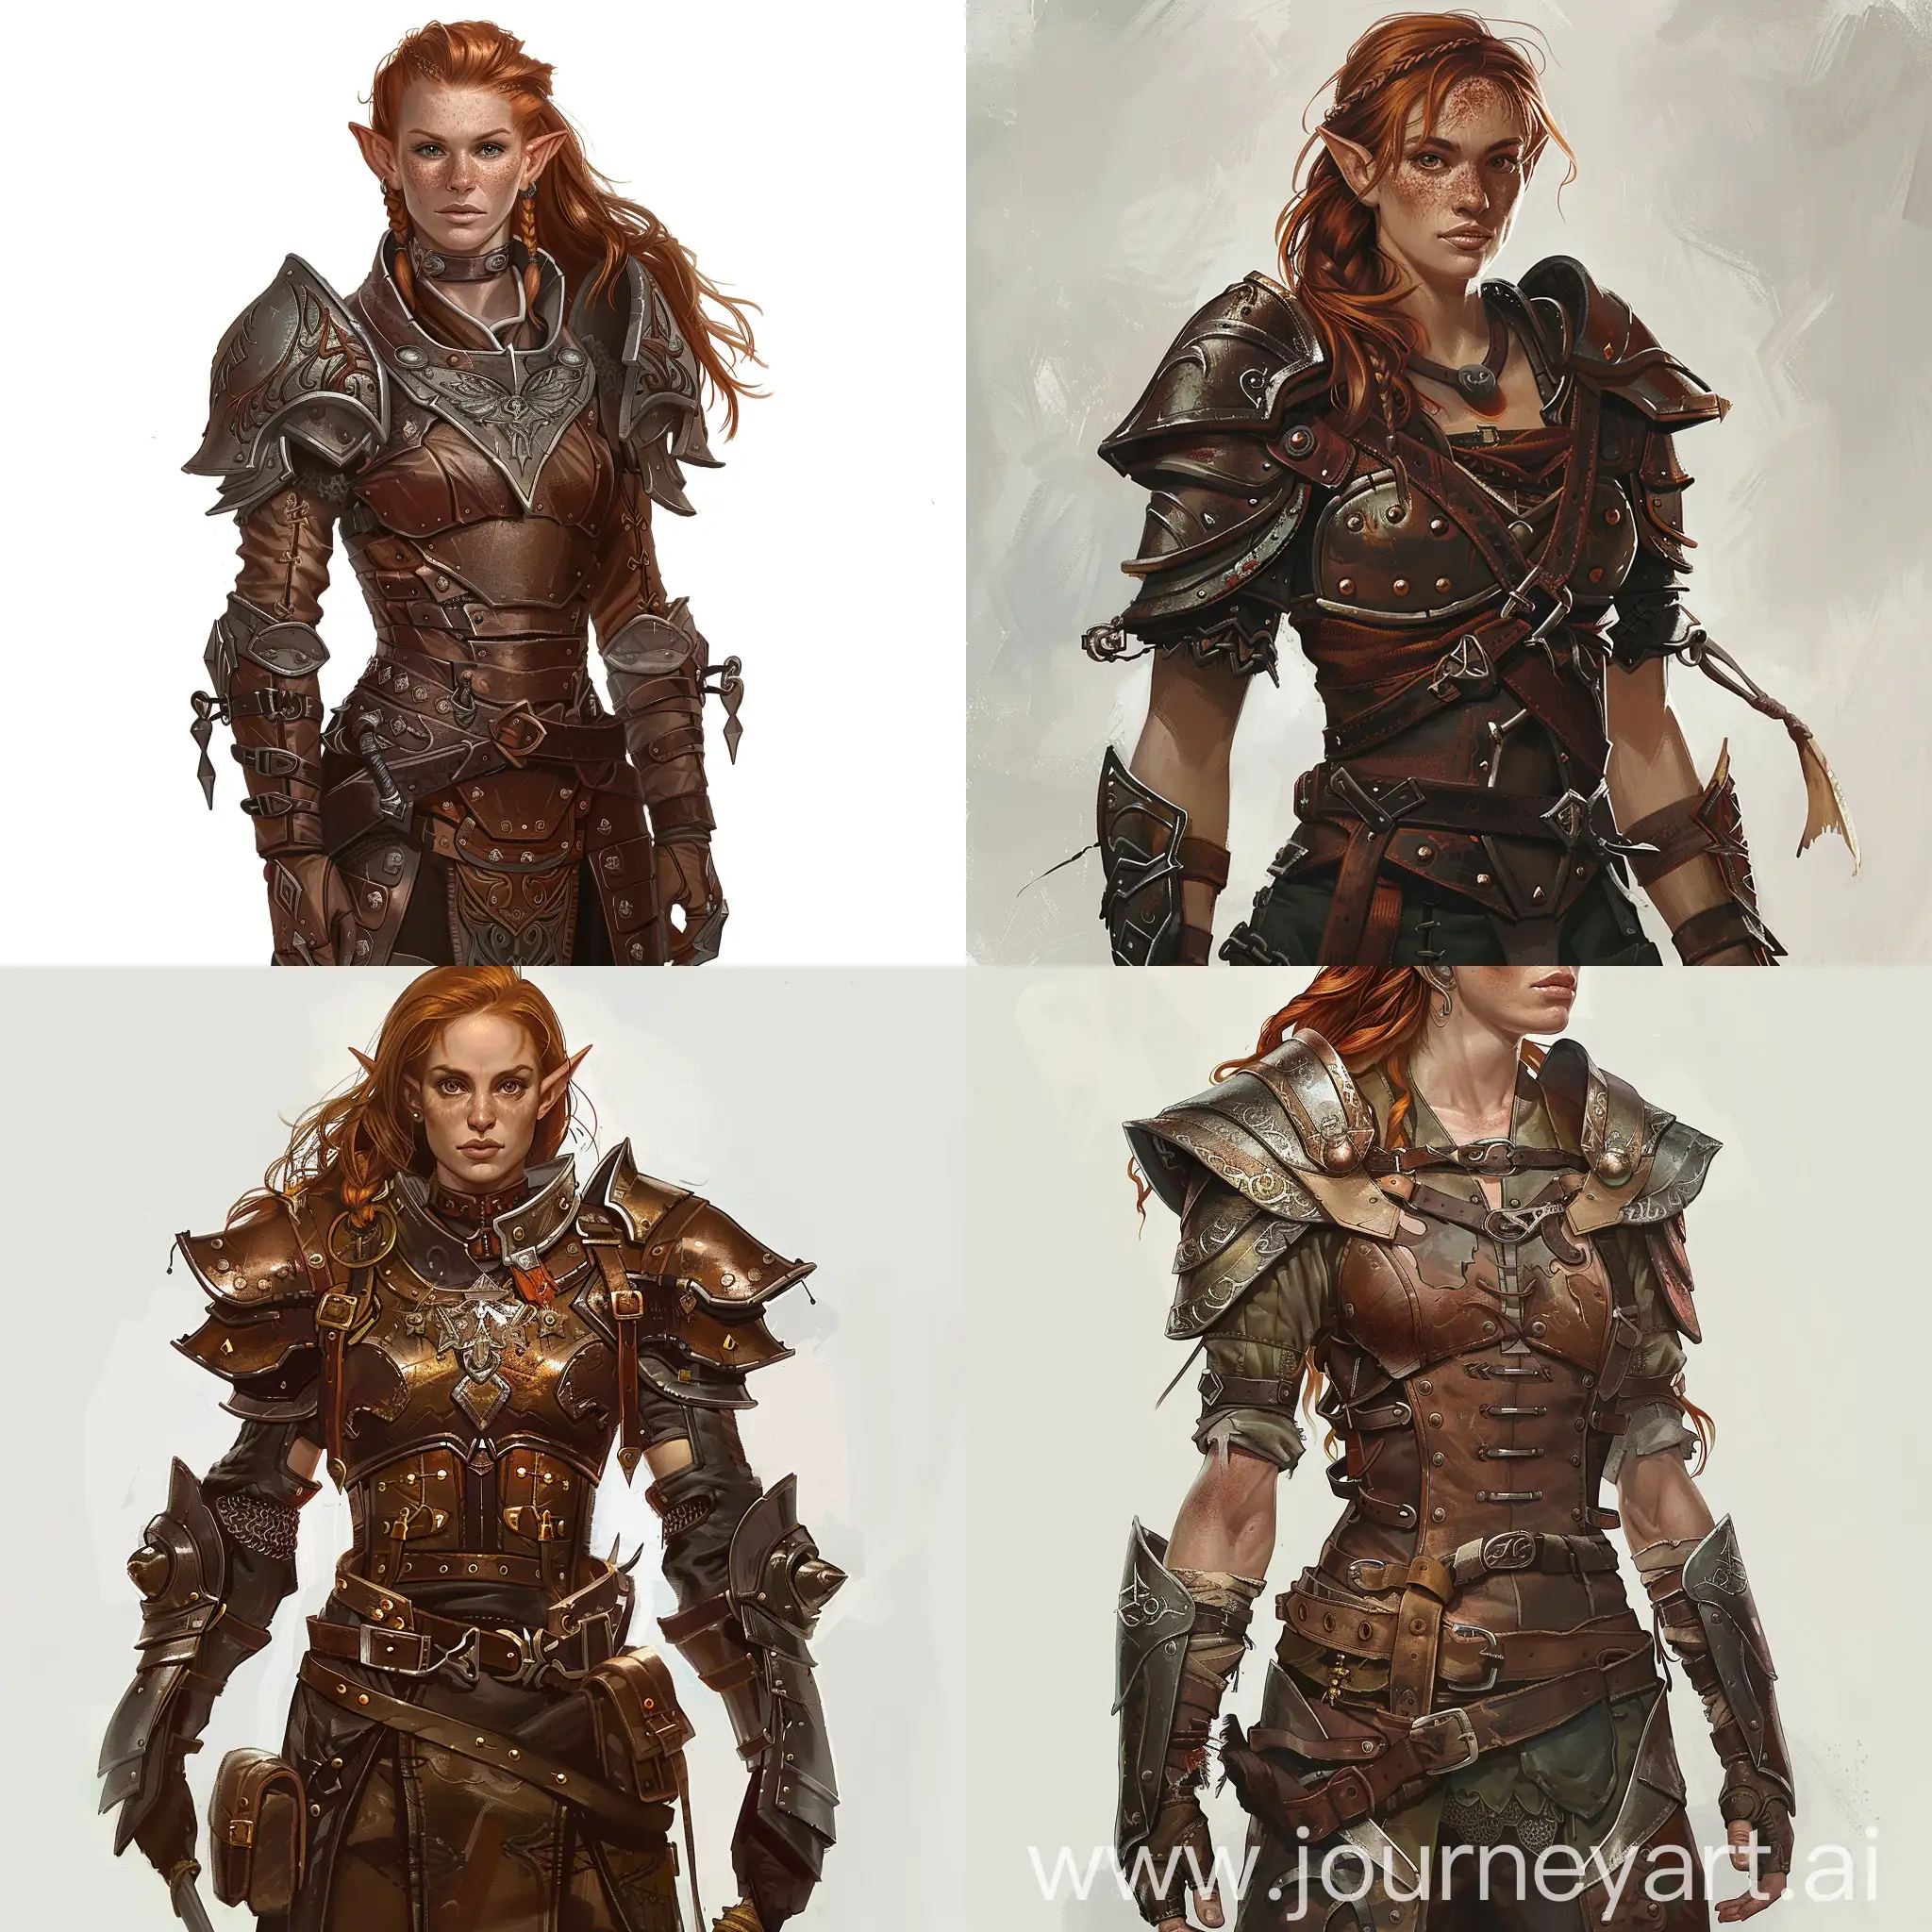 Powerful-Elven-Warrior-Woman-in-Brown-Leather-Armor